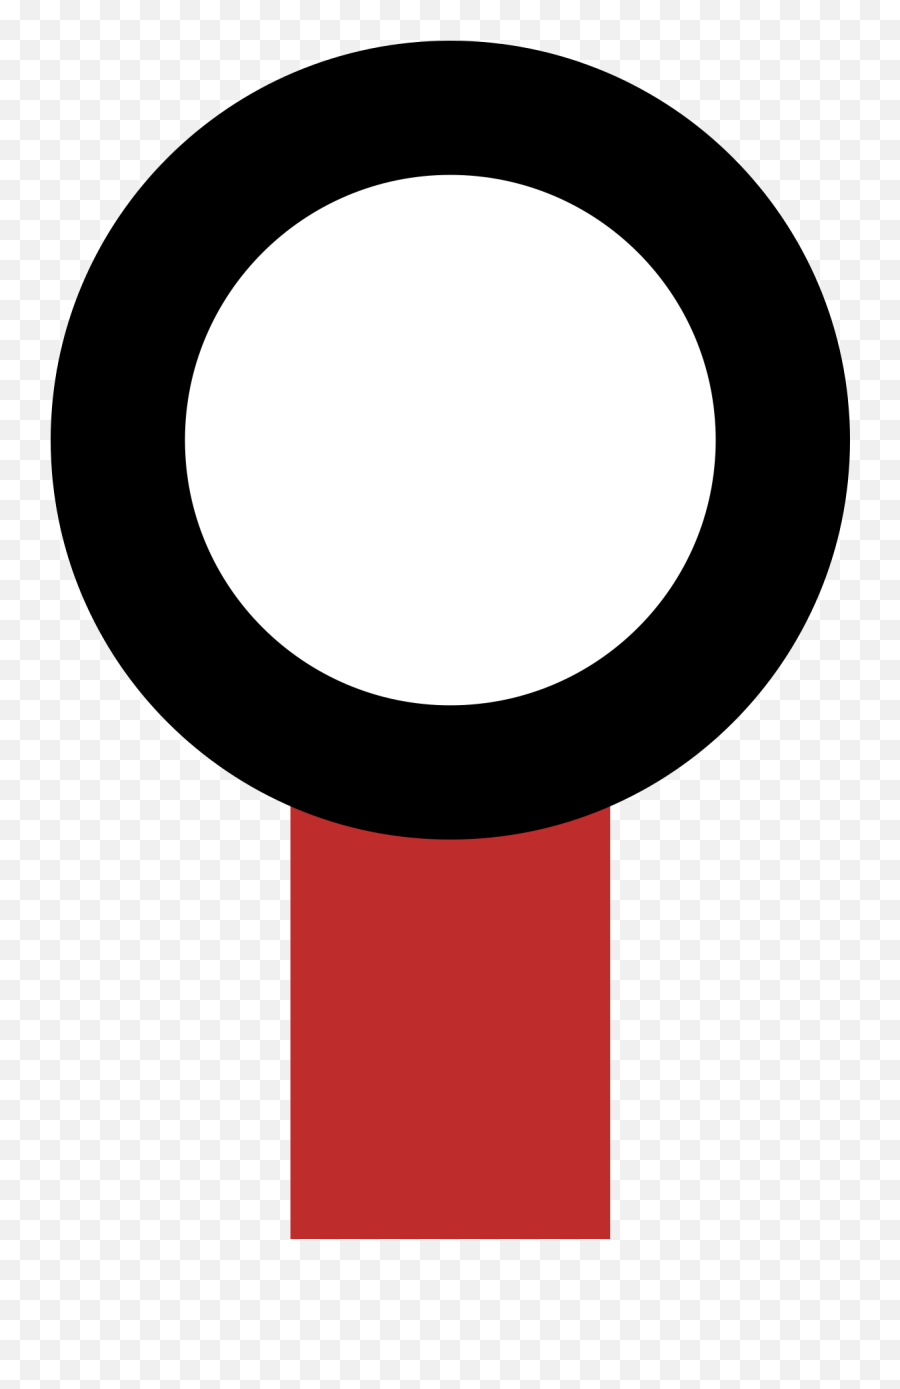 Filebsicon Dkintasvg - Wikipedia Dot Png,Crouch Icon